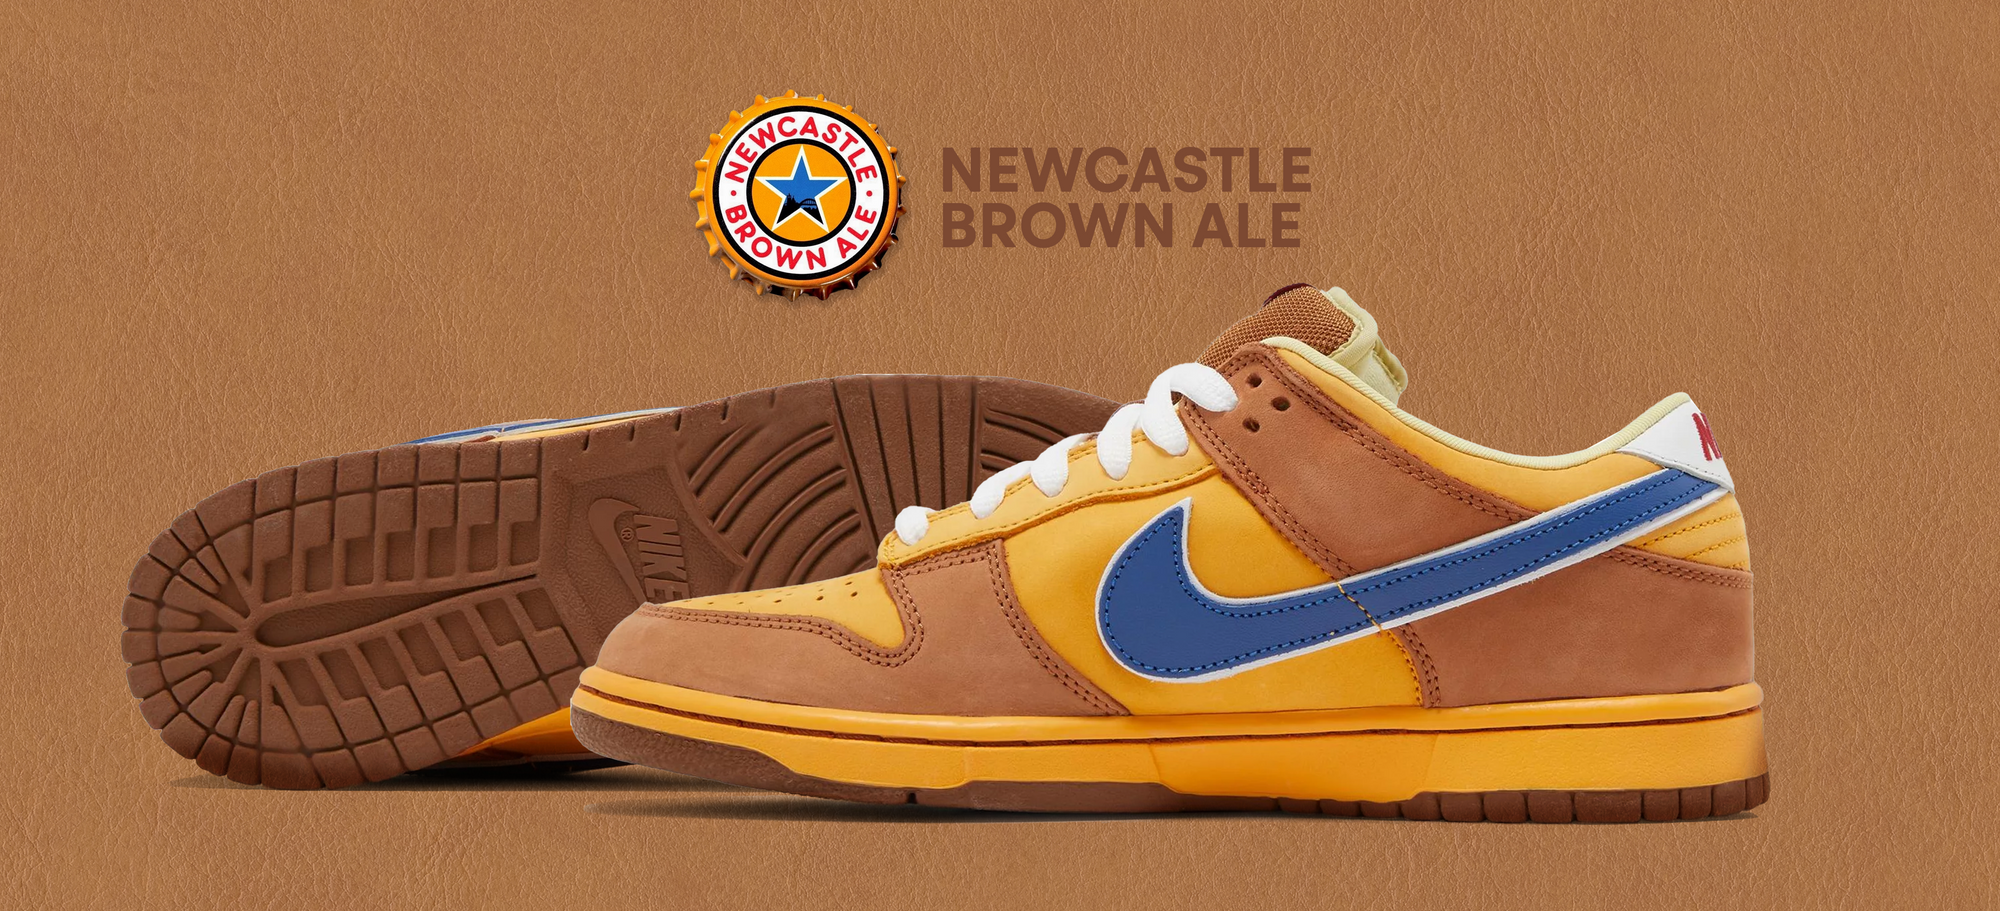 Story Behind the Nike SB Dunk Low ‘Newcastle Brown Ale’